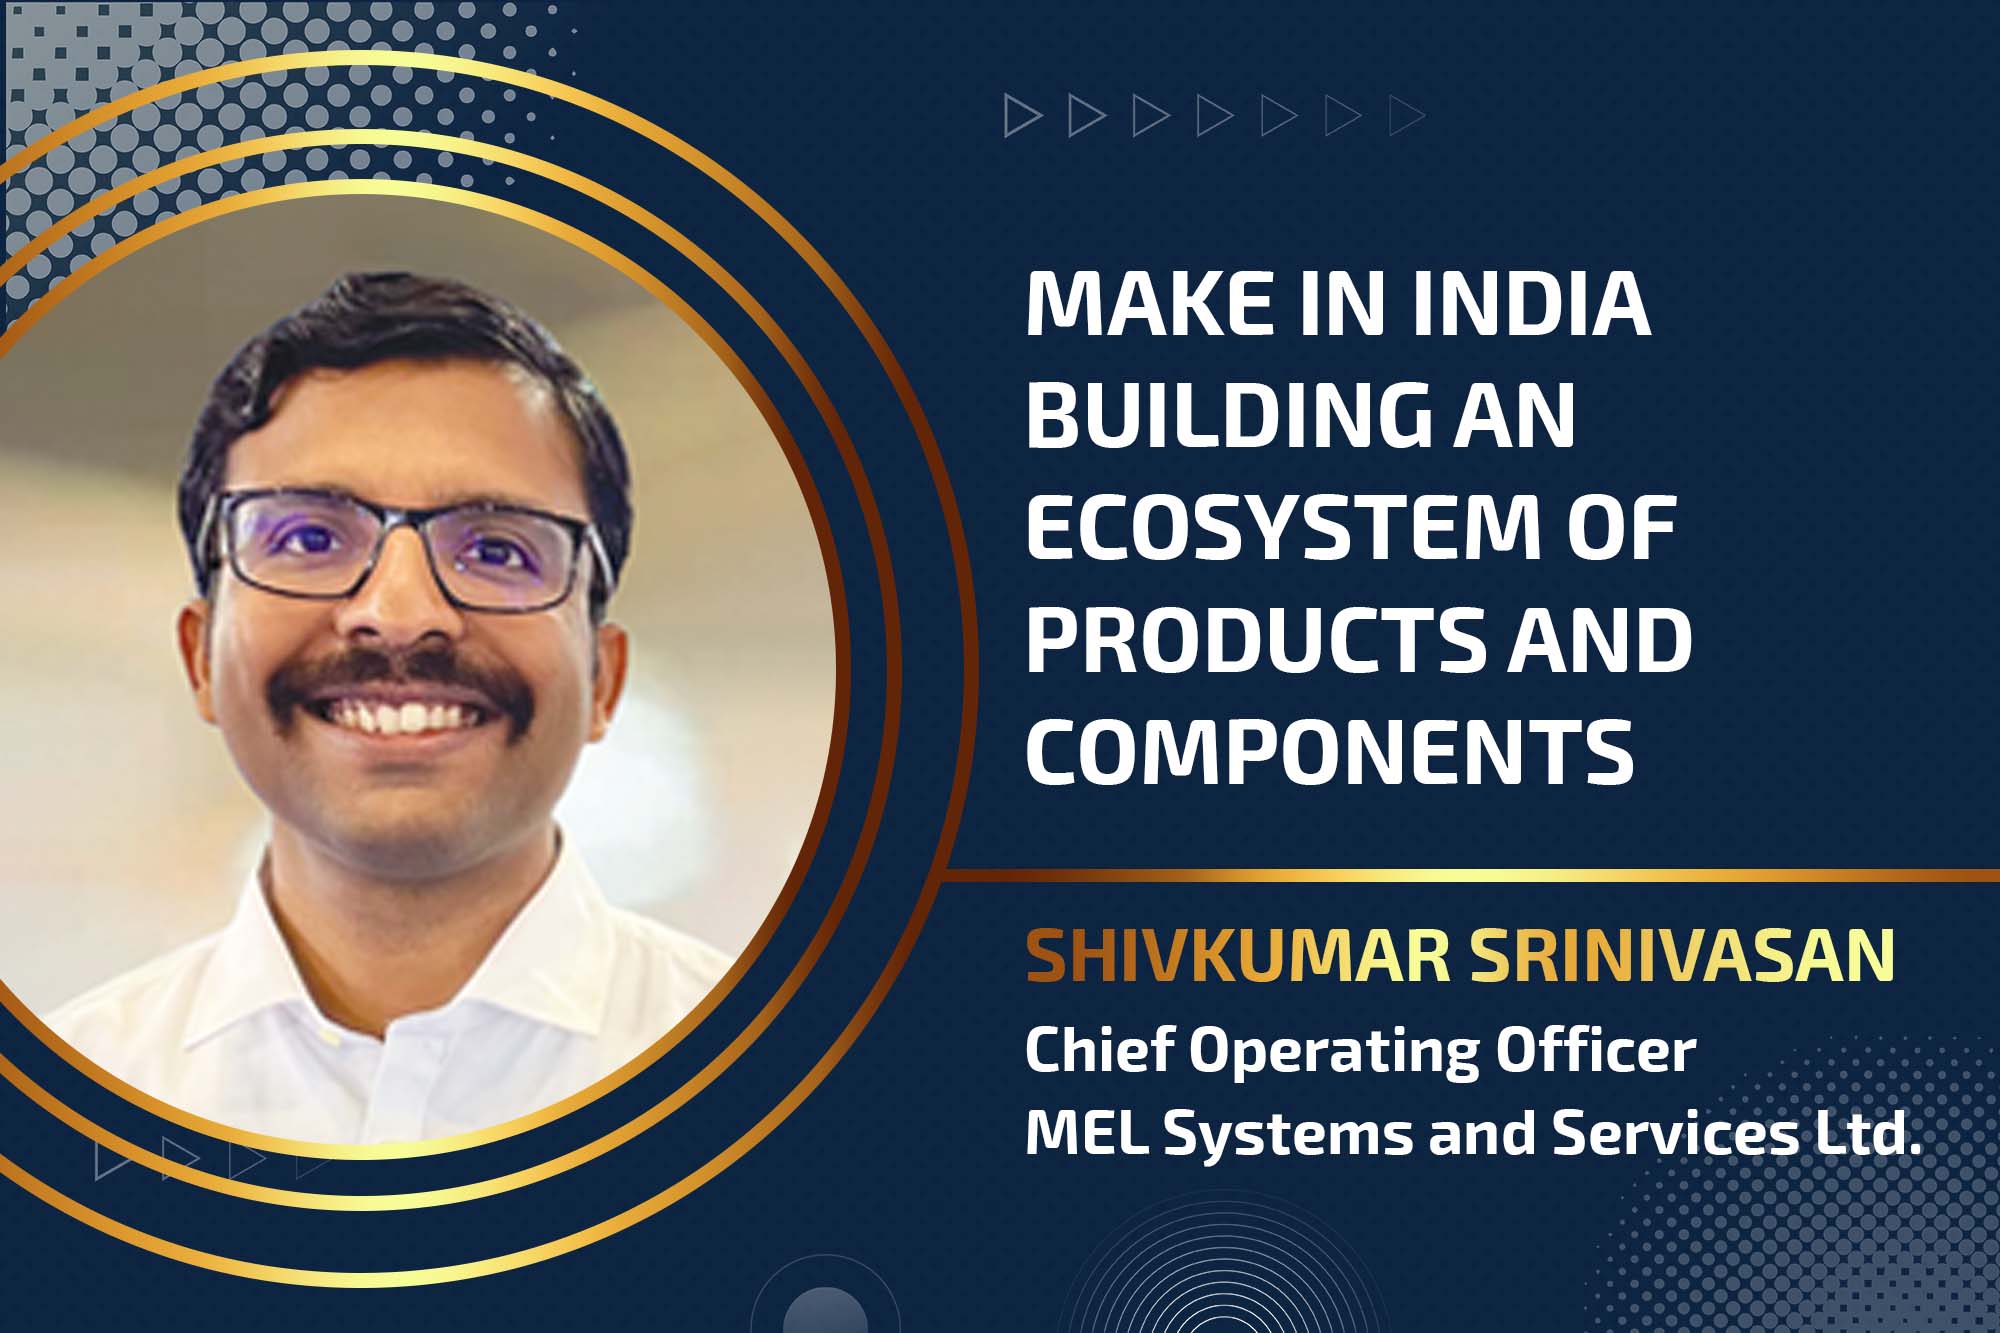 “Make in India” building an ecosystem of products and components